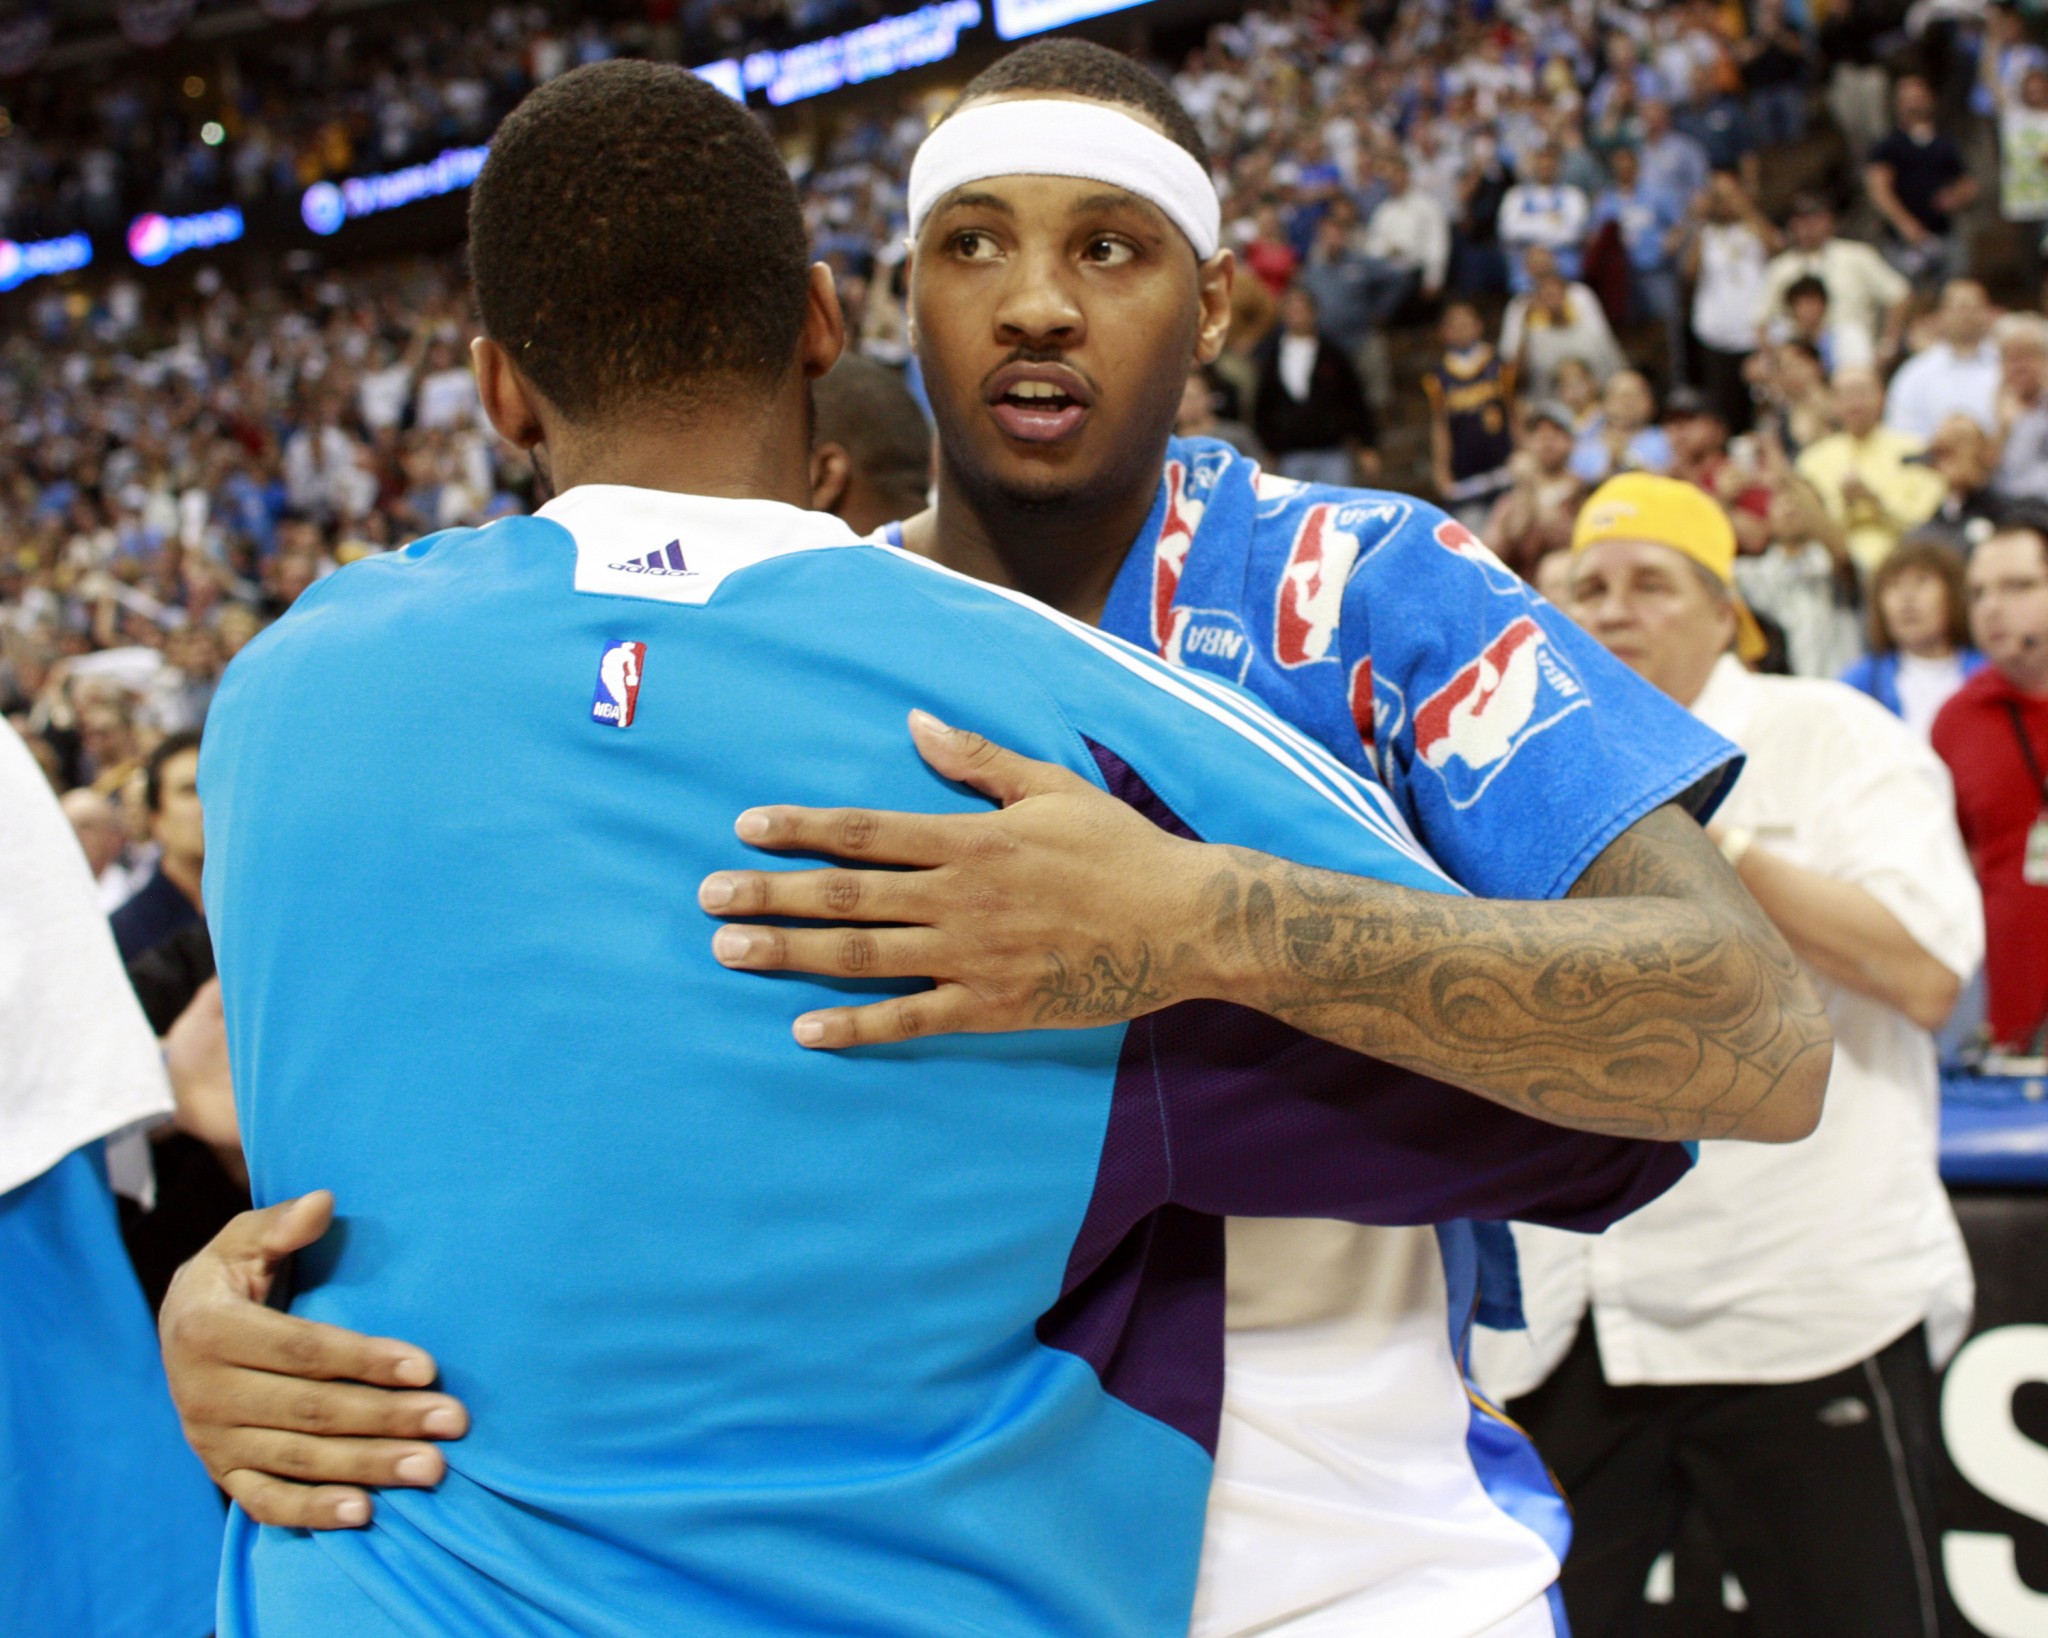 Carmelo Anthony is not entirely sure how to approach Morris Peterson in this postgame interaction. (AP/David Zalubowski)